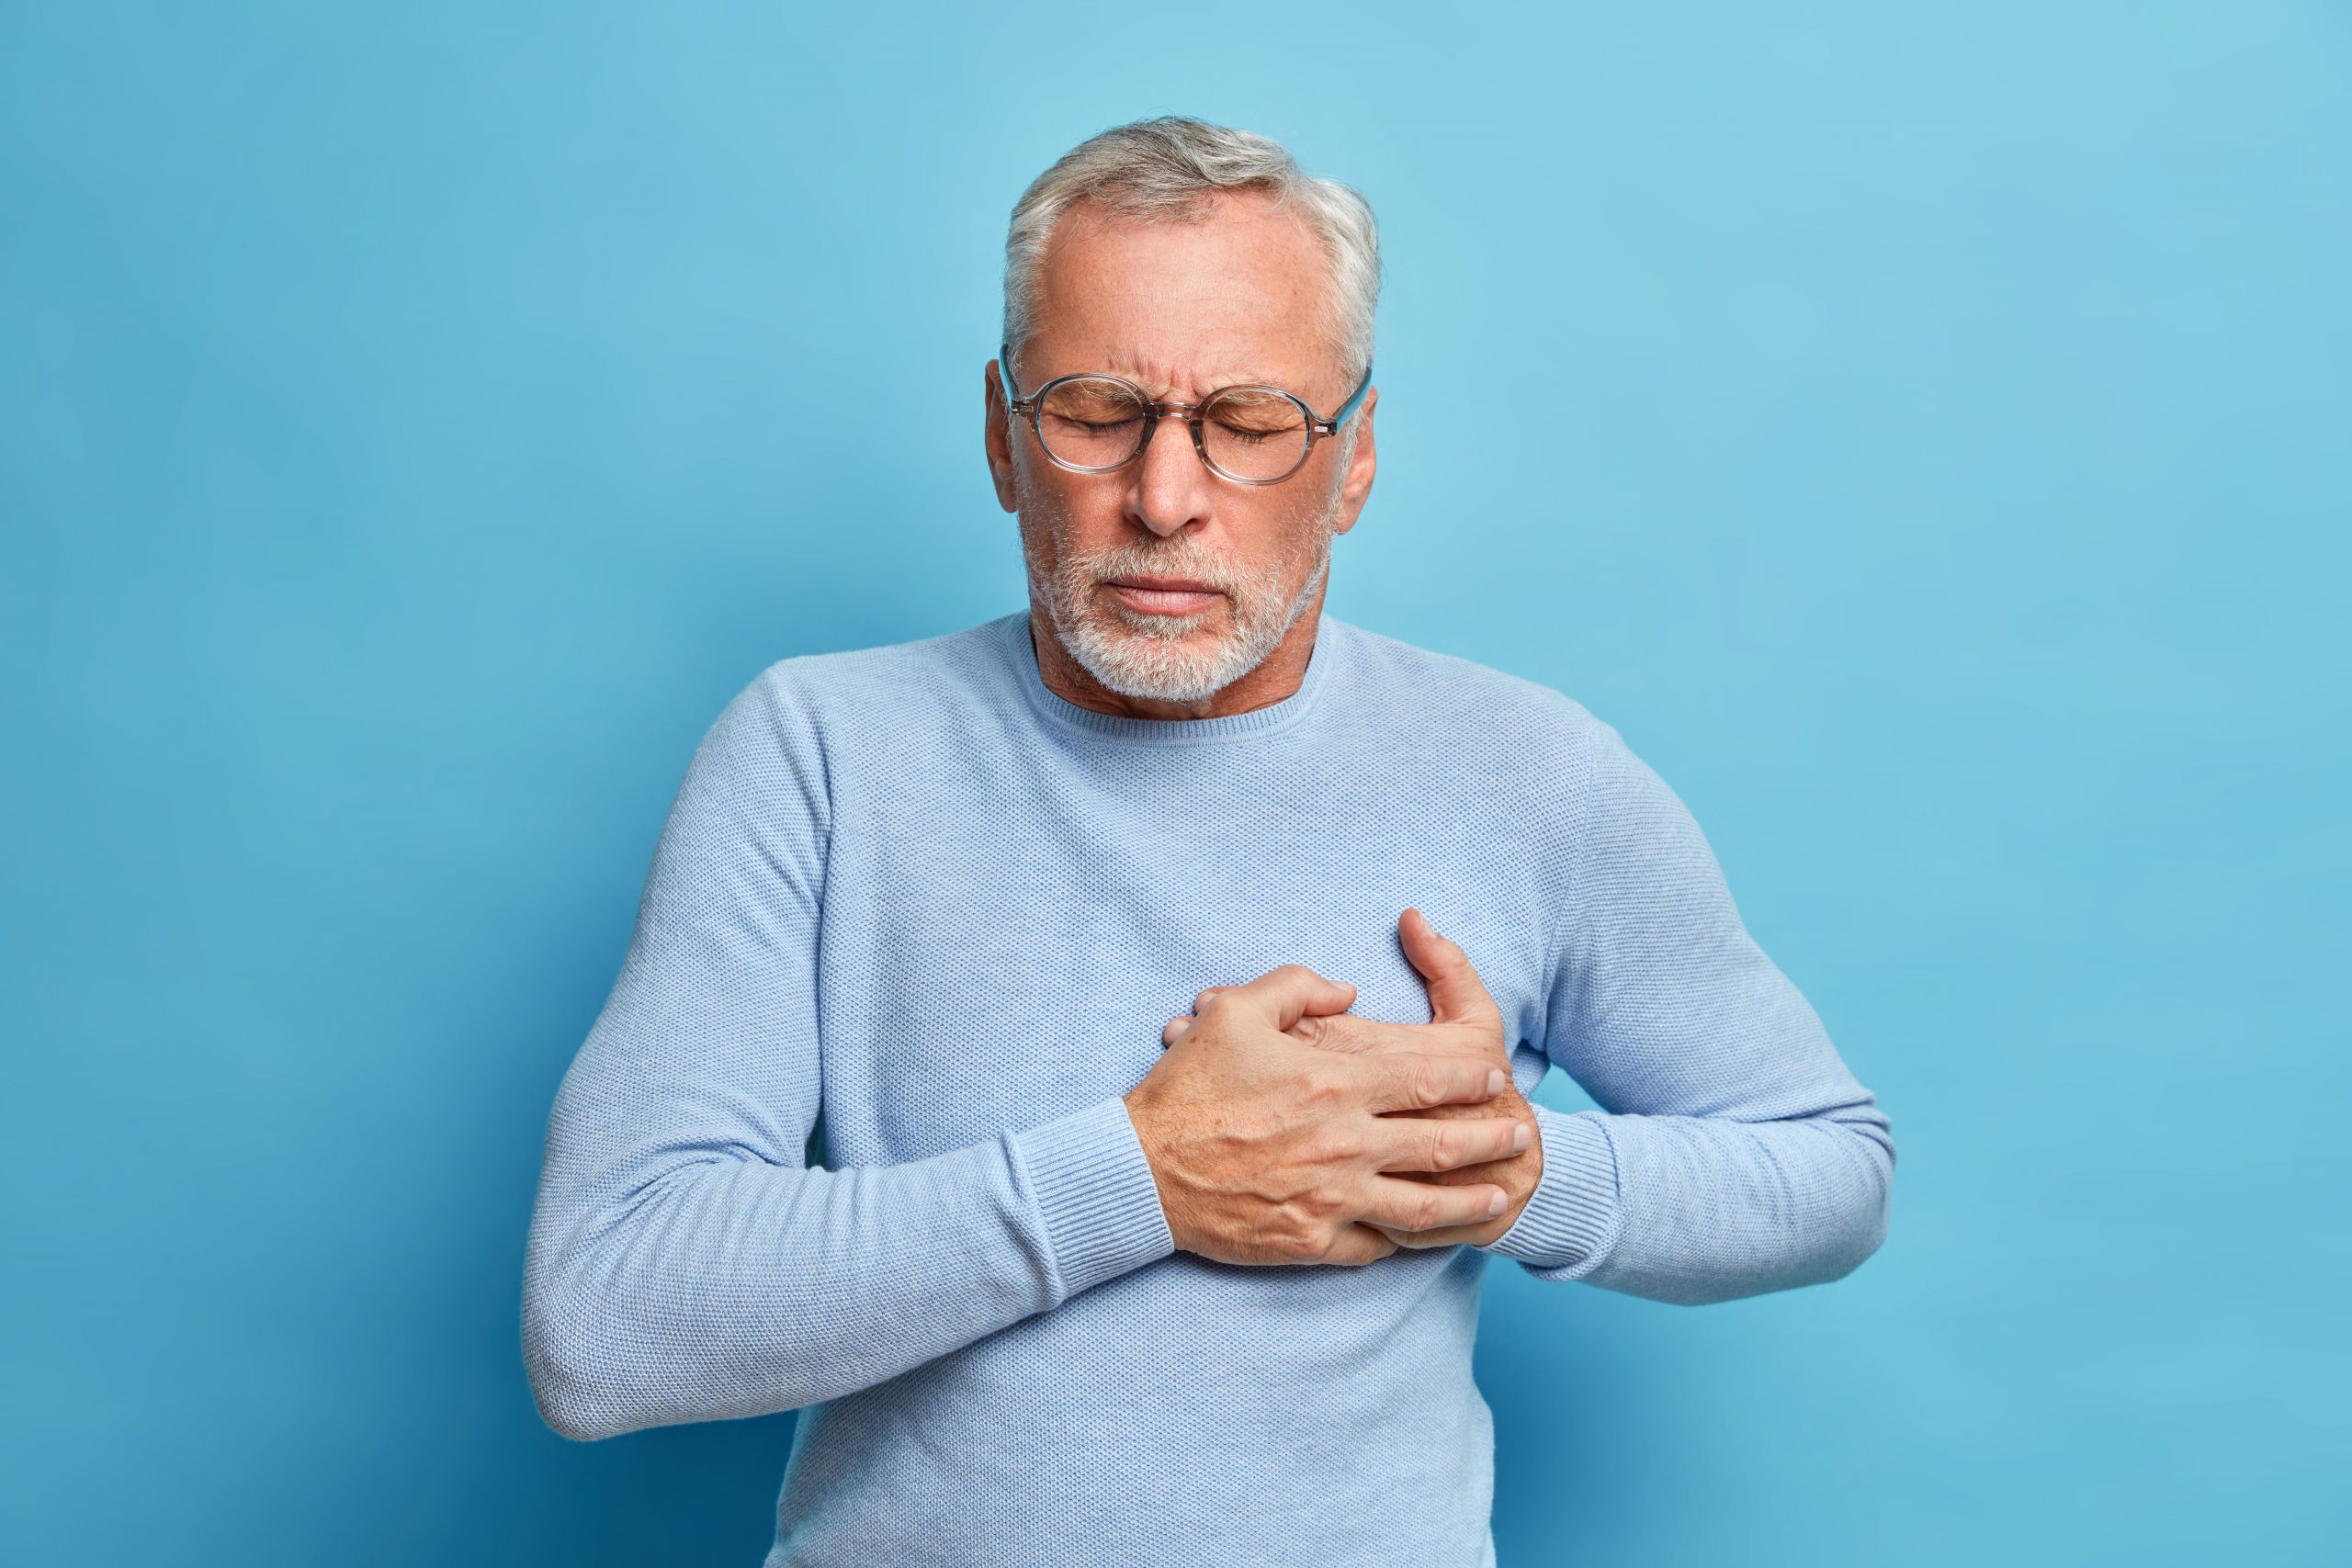 Can Atrial Fibrillation Cause a Heart Attack?